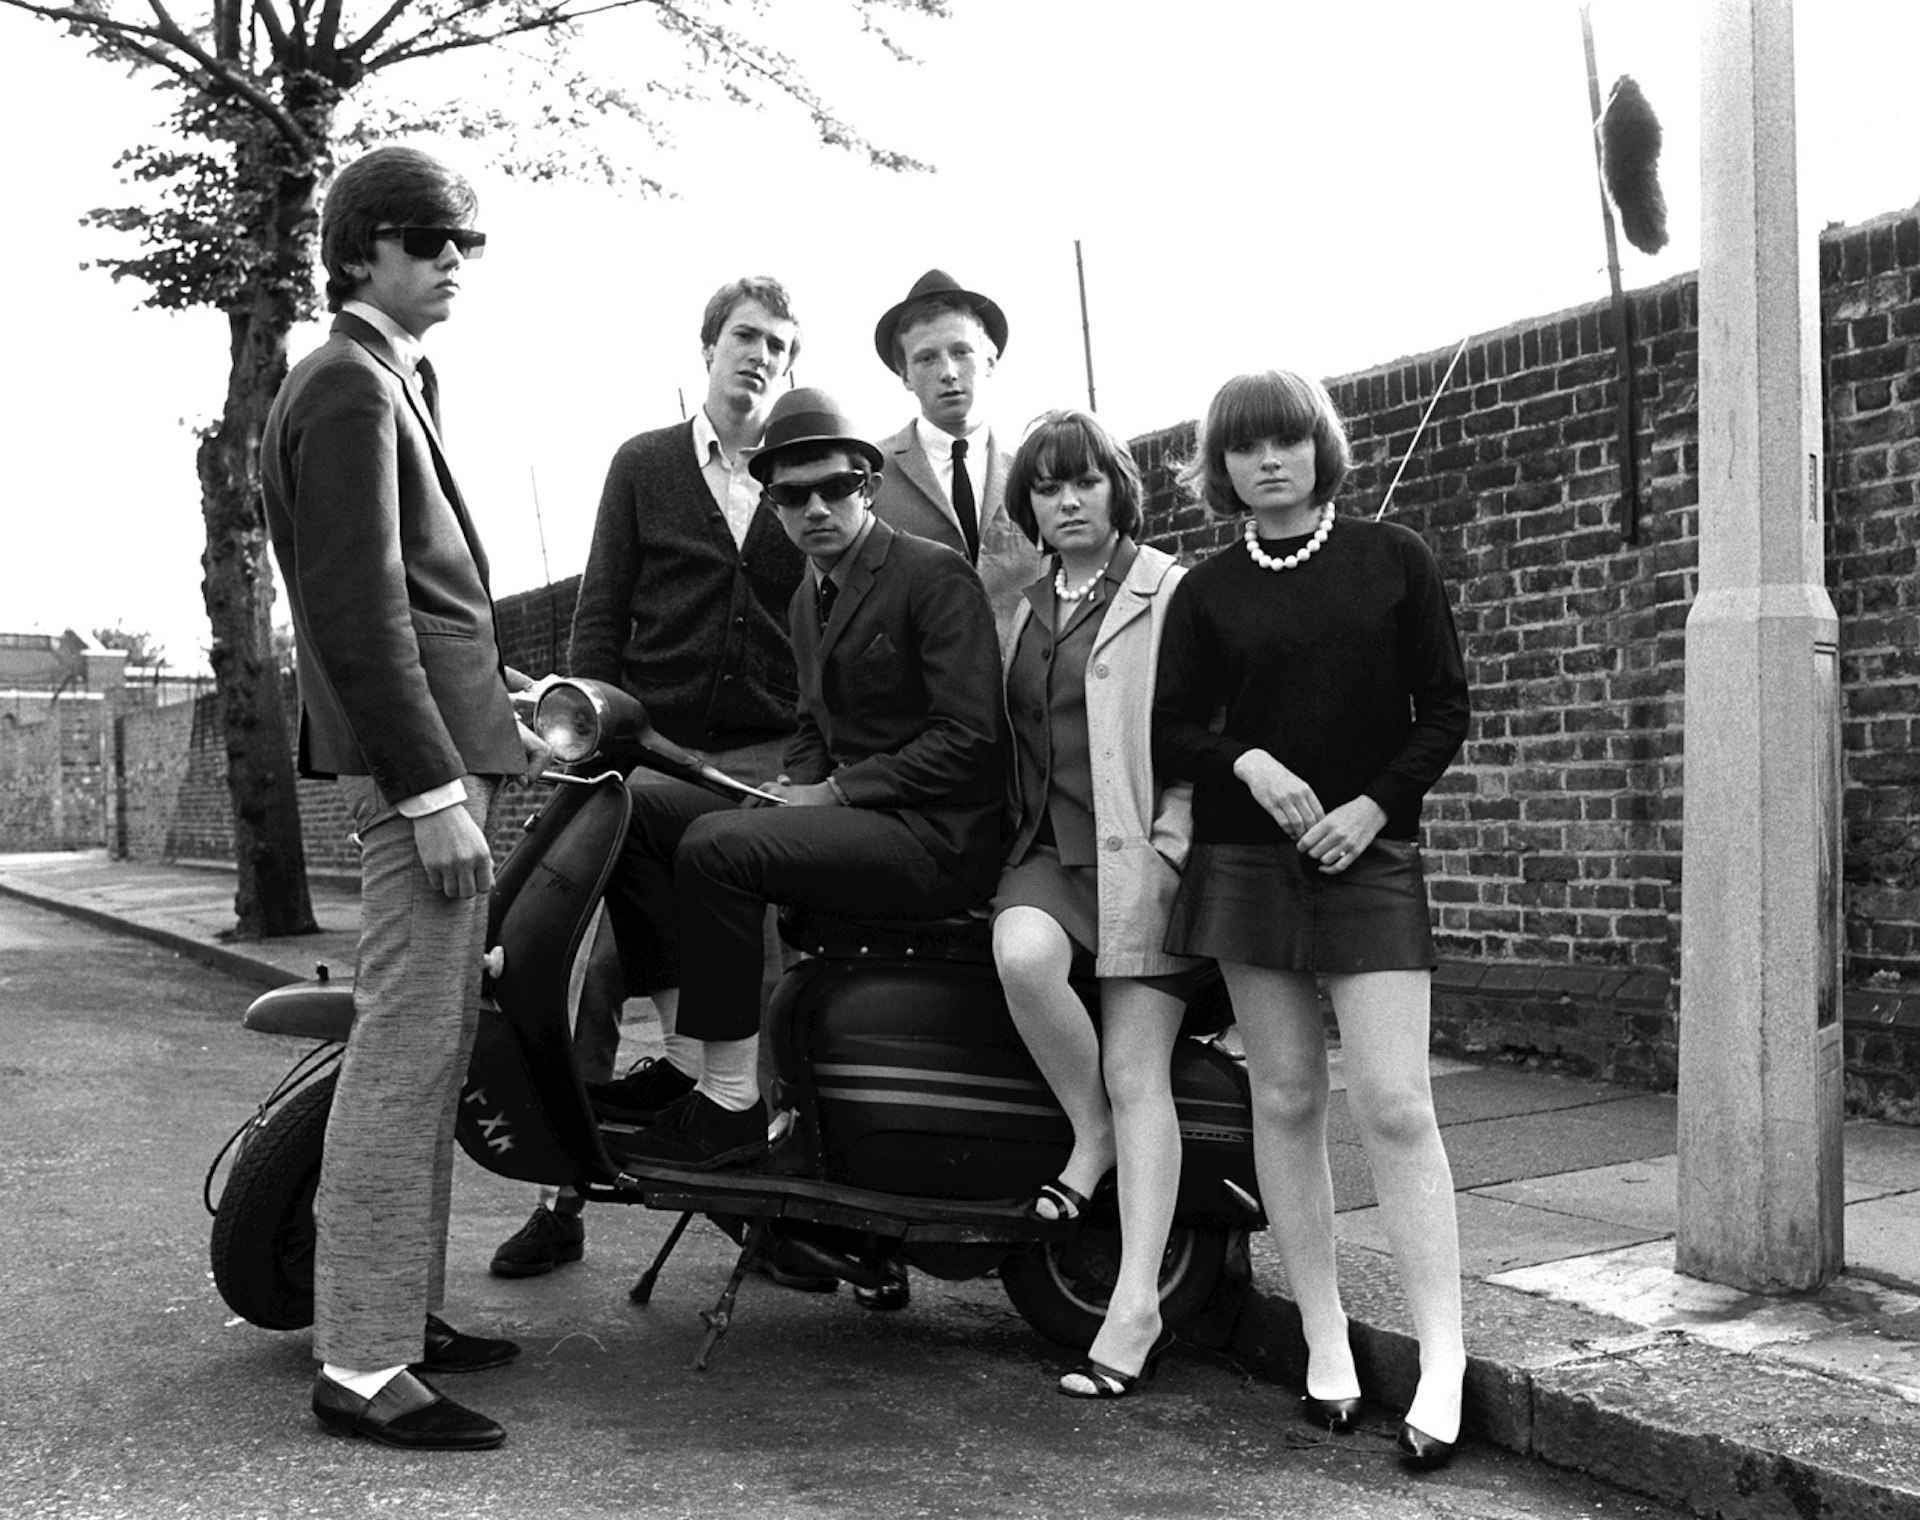 Shooting the second wave of Britain’s mods and rockers